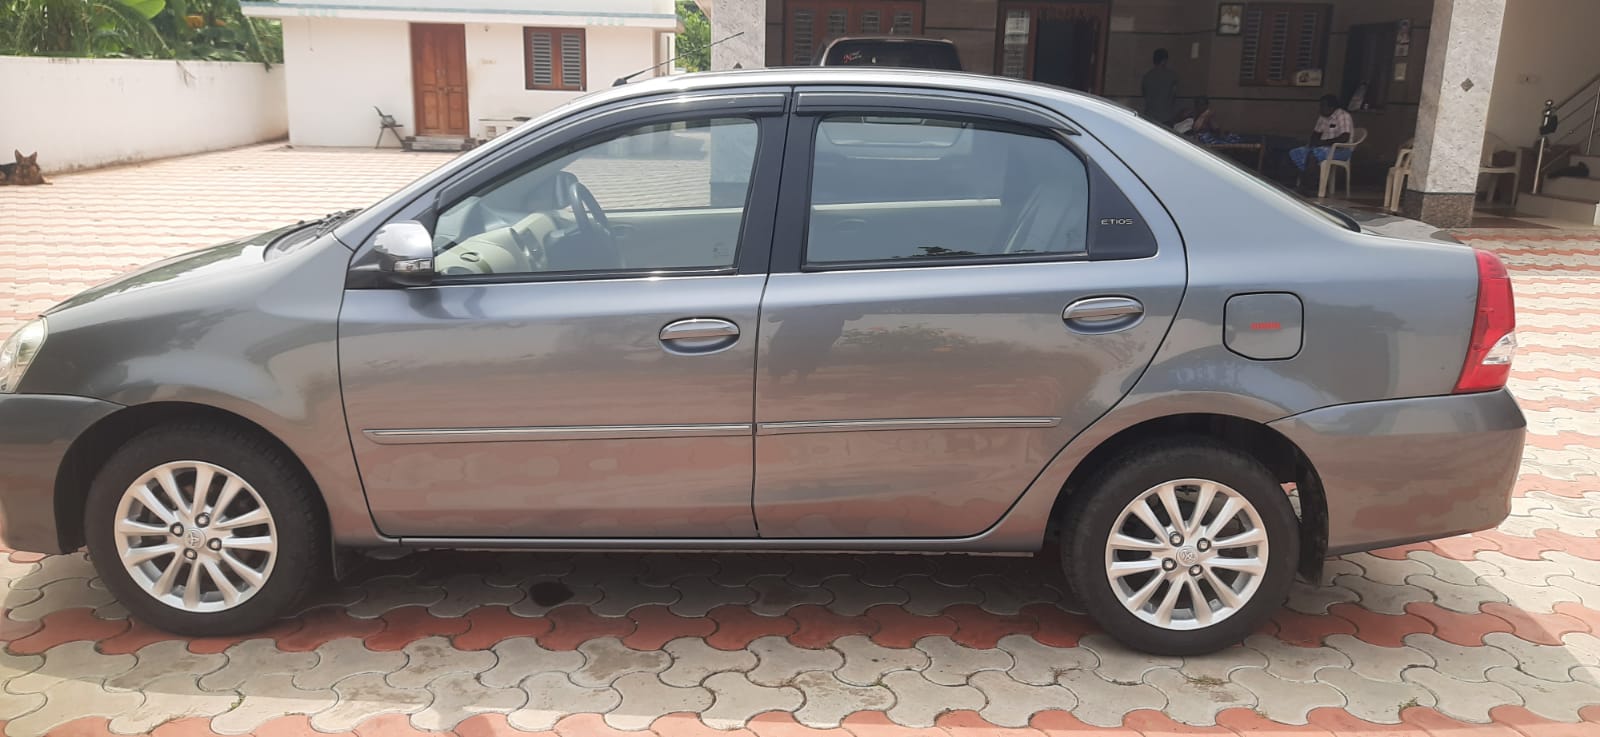 4718-for-sale-Toyota-Etios-Diesel-Second-Owner-2017-TN-registered-rs-690000